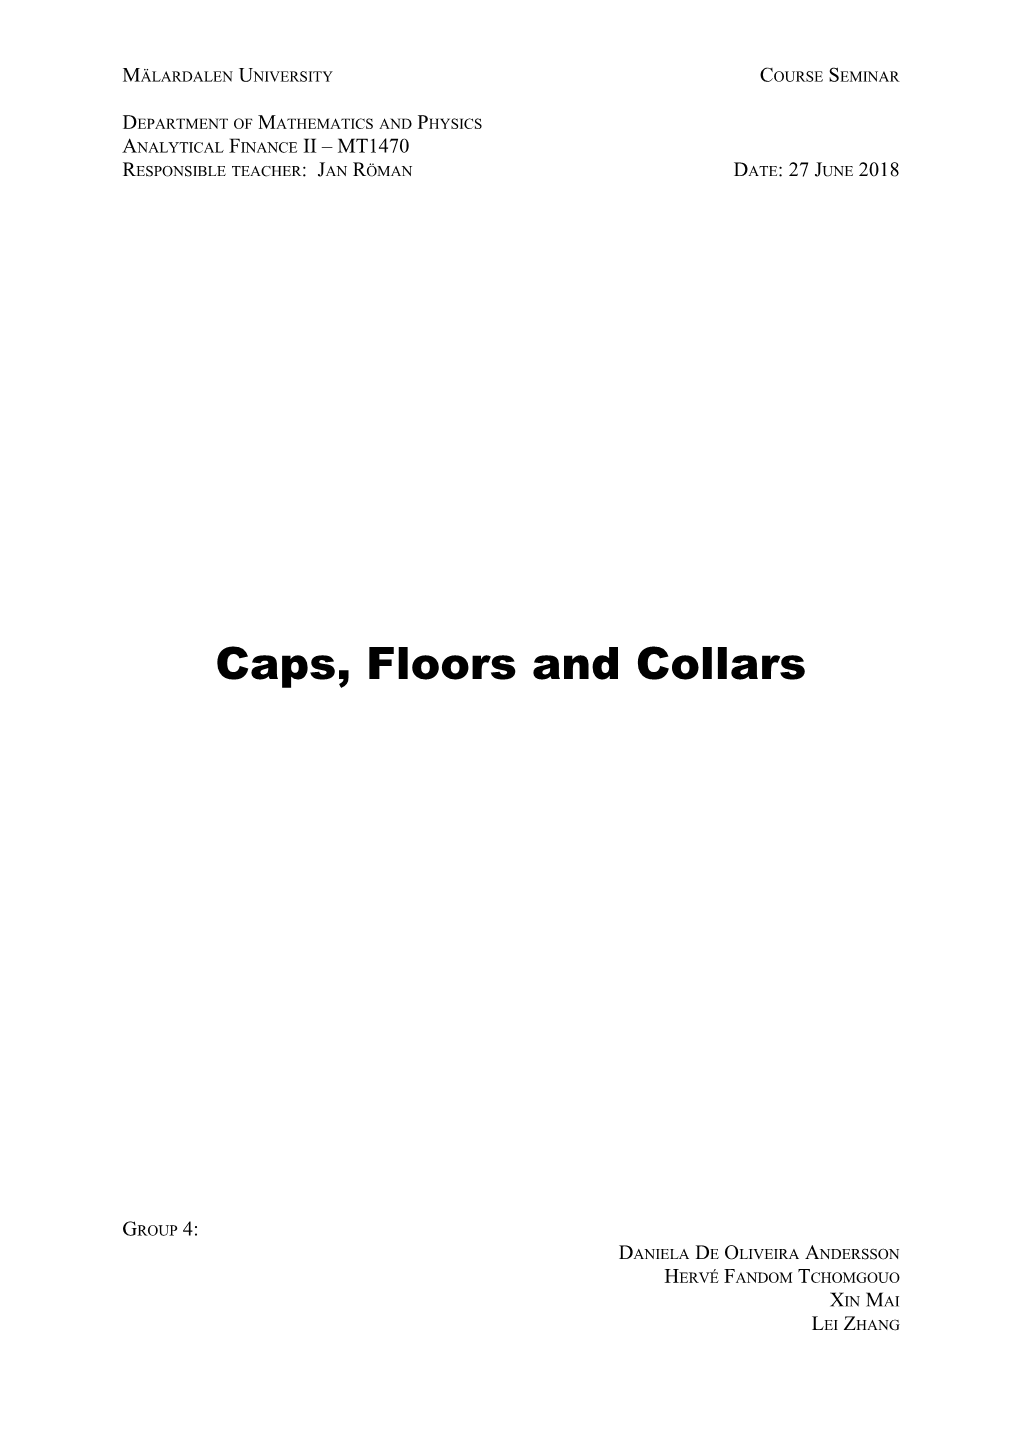 Caps, Floors and Collars